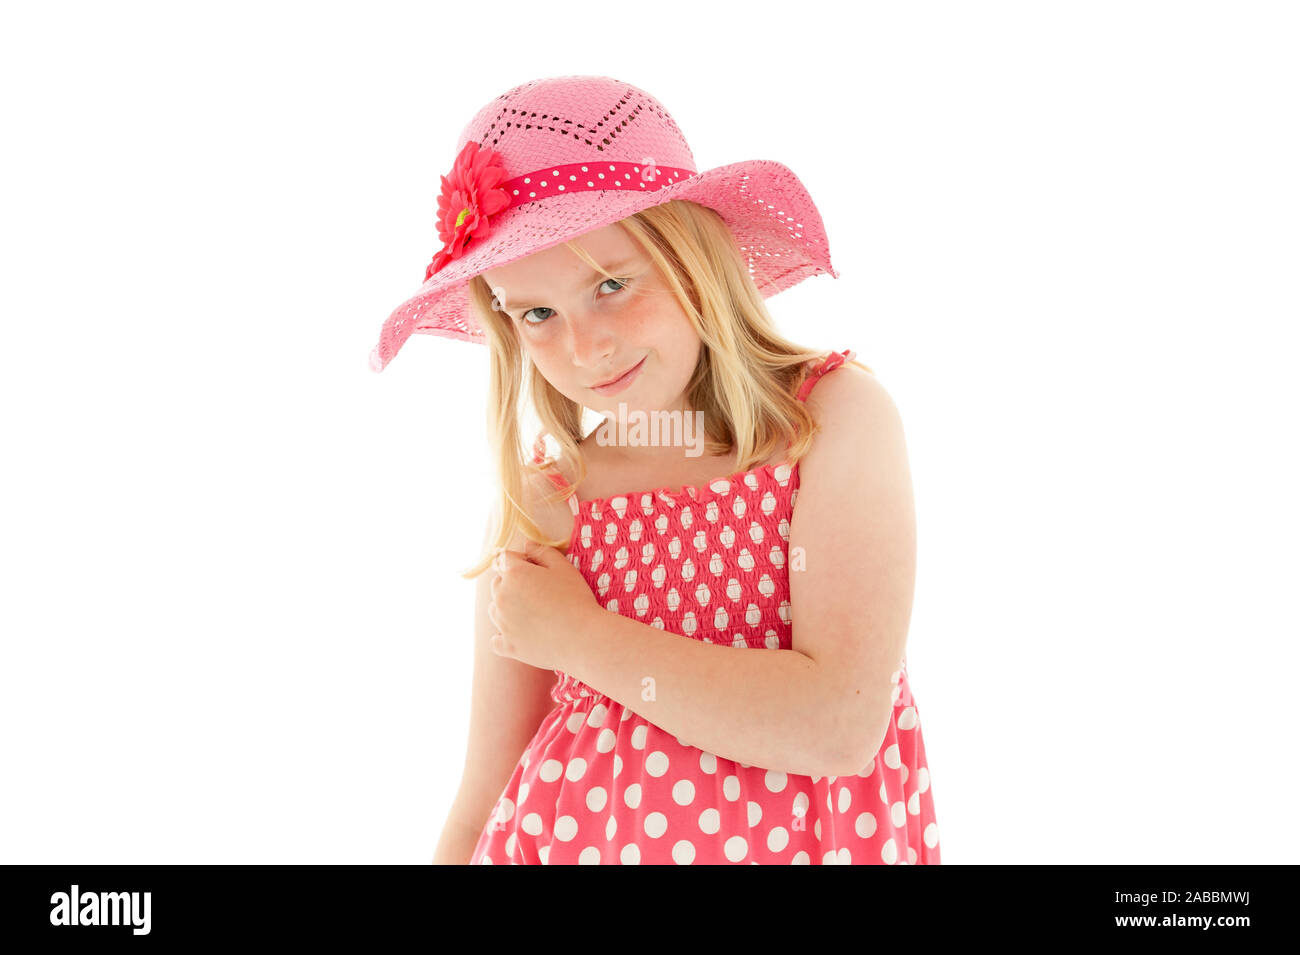 Beautiful young blonde girl with enigmatic smile wearing big pink floppy hat and a polka dot dress. Isolated on white studio background Stock Photo